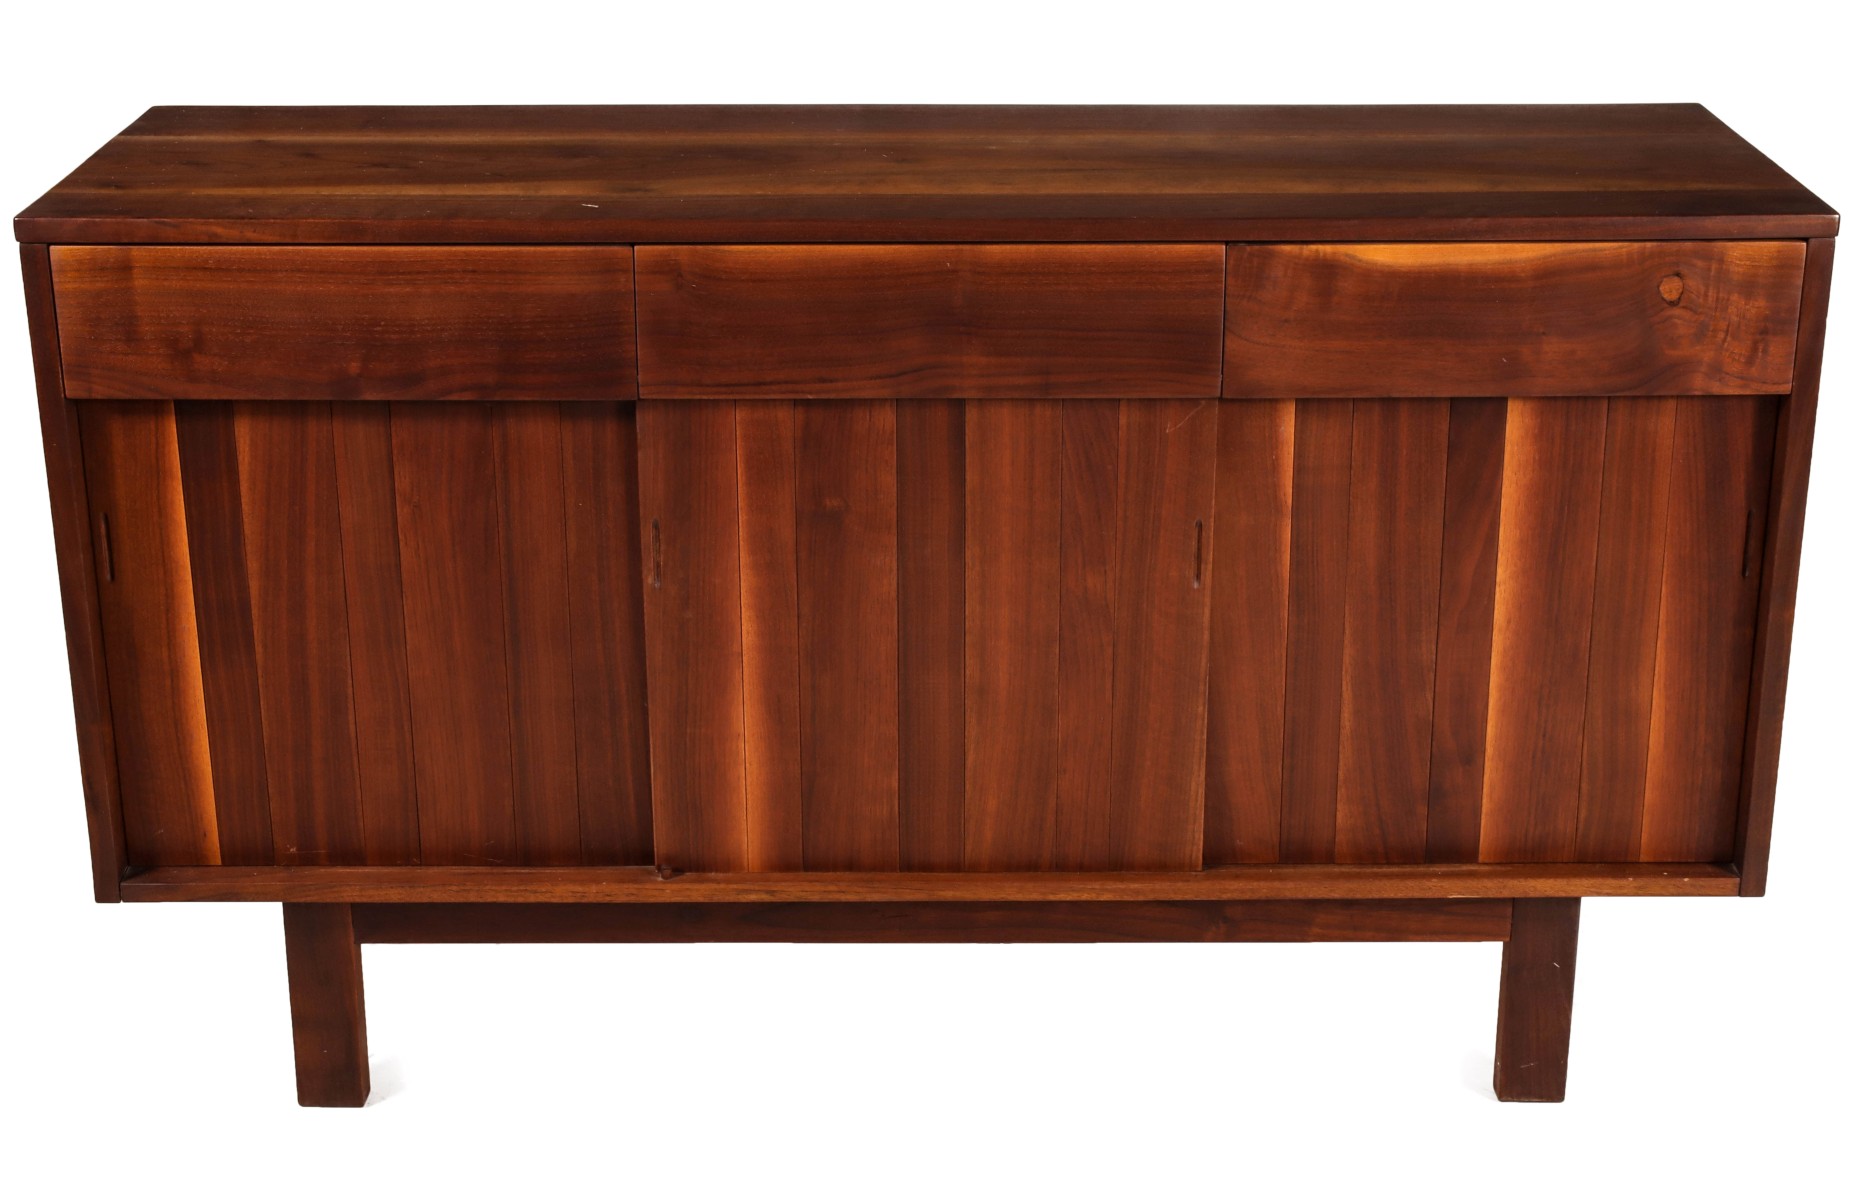 A LATE 20TH C. FLOATING CREDENZA BY CLARENCE TEED